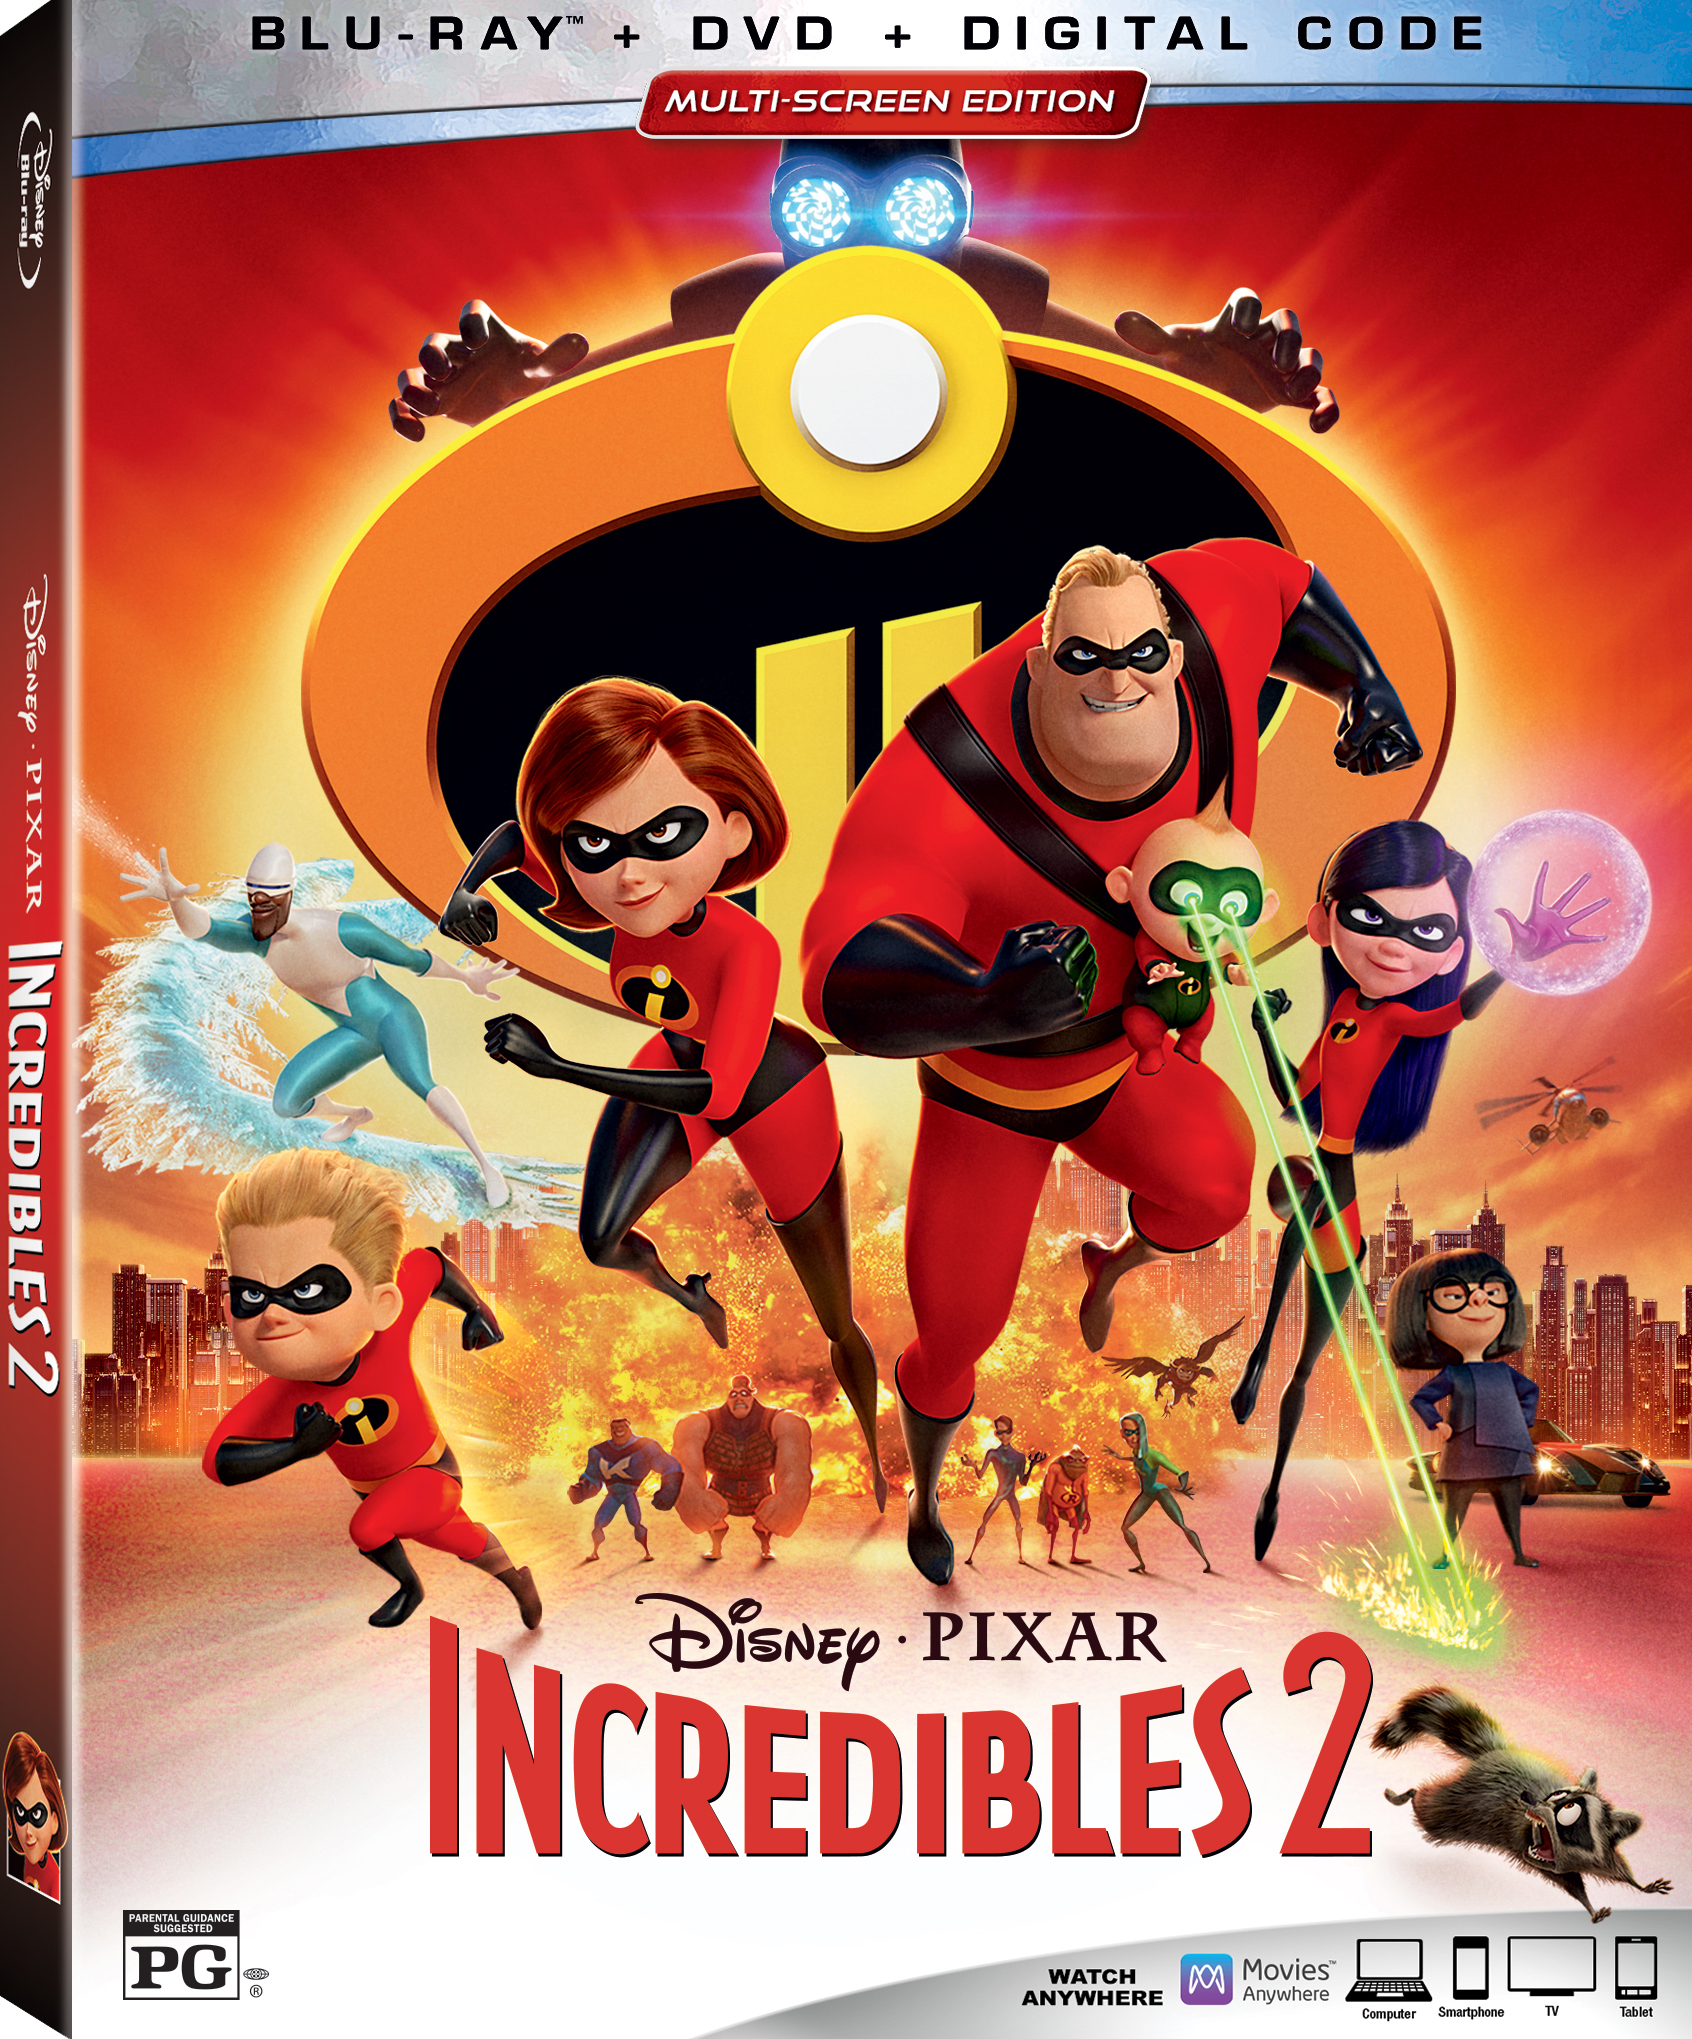 The creative stay at Home mom Incredibles slime and dvd